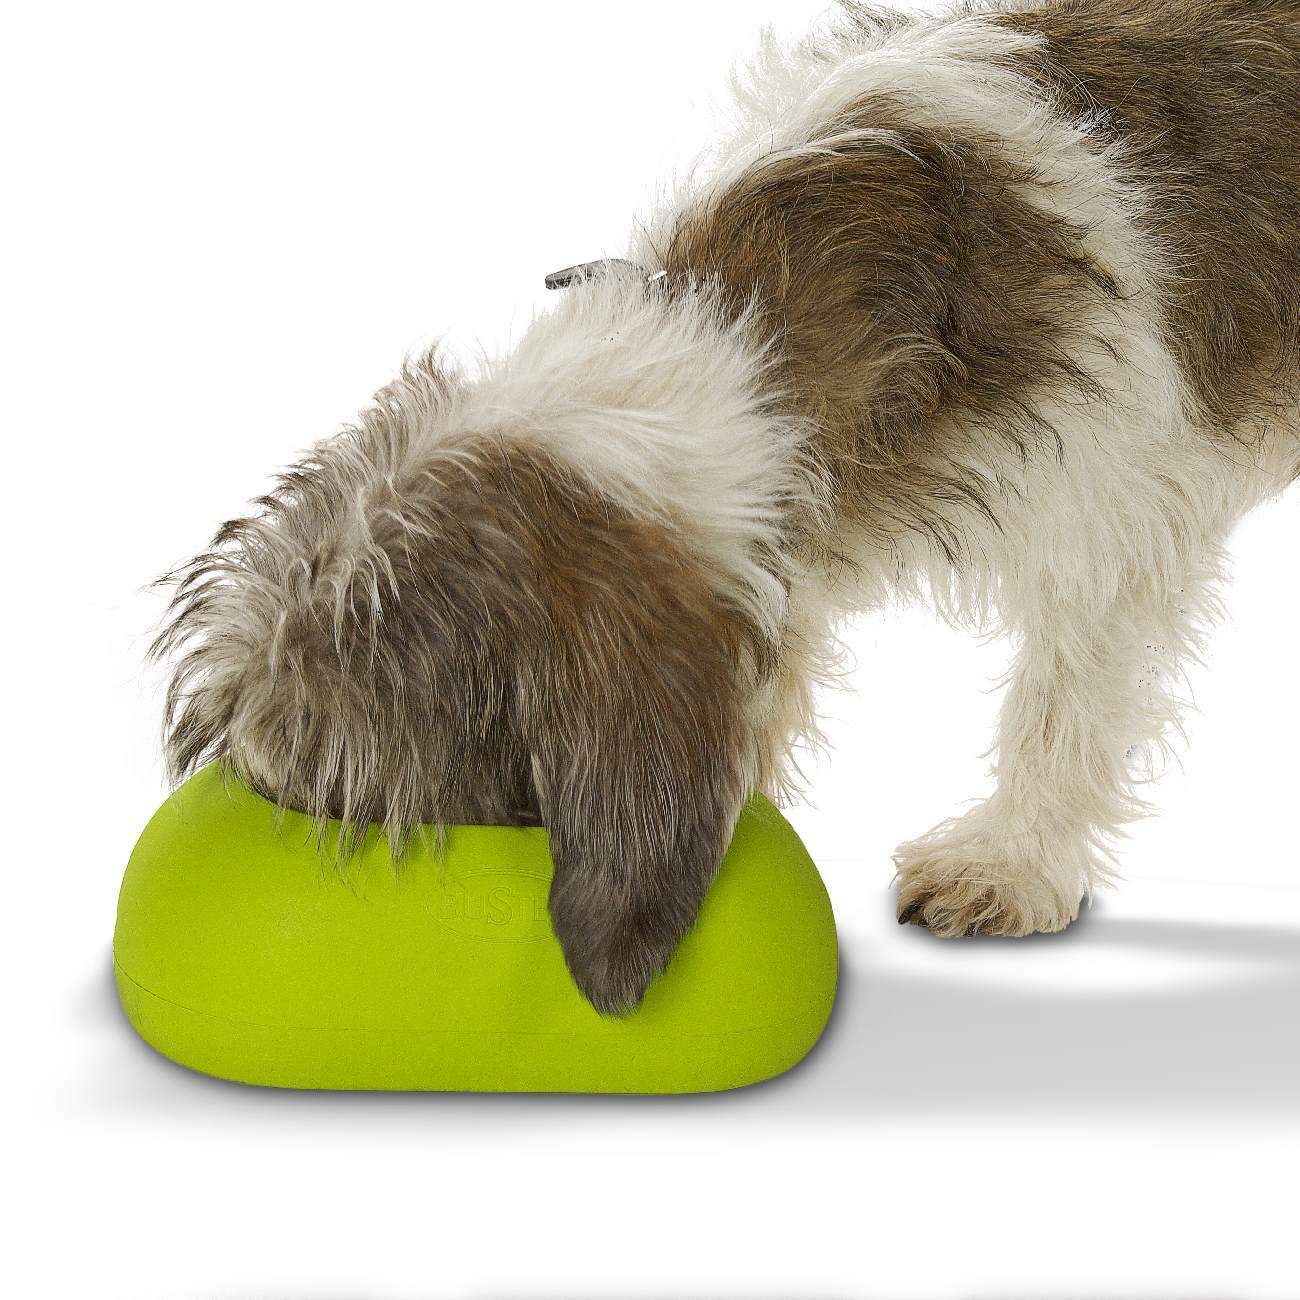 Buster IncrediBowl Wet and Dry Food Bowl for Long Eared Dogs - 2 Sizes image 2